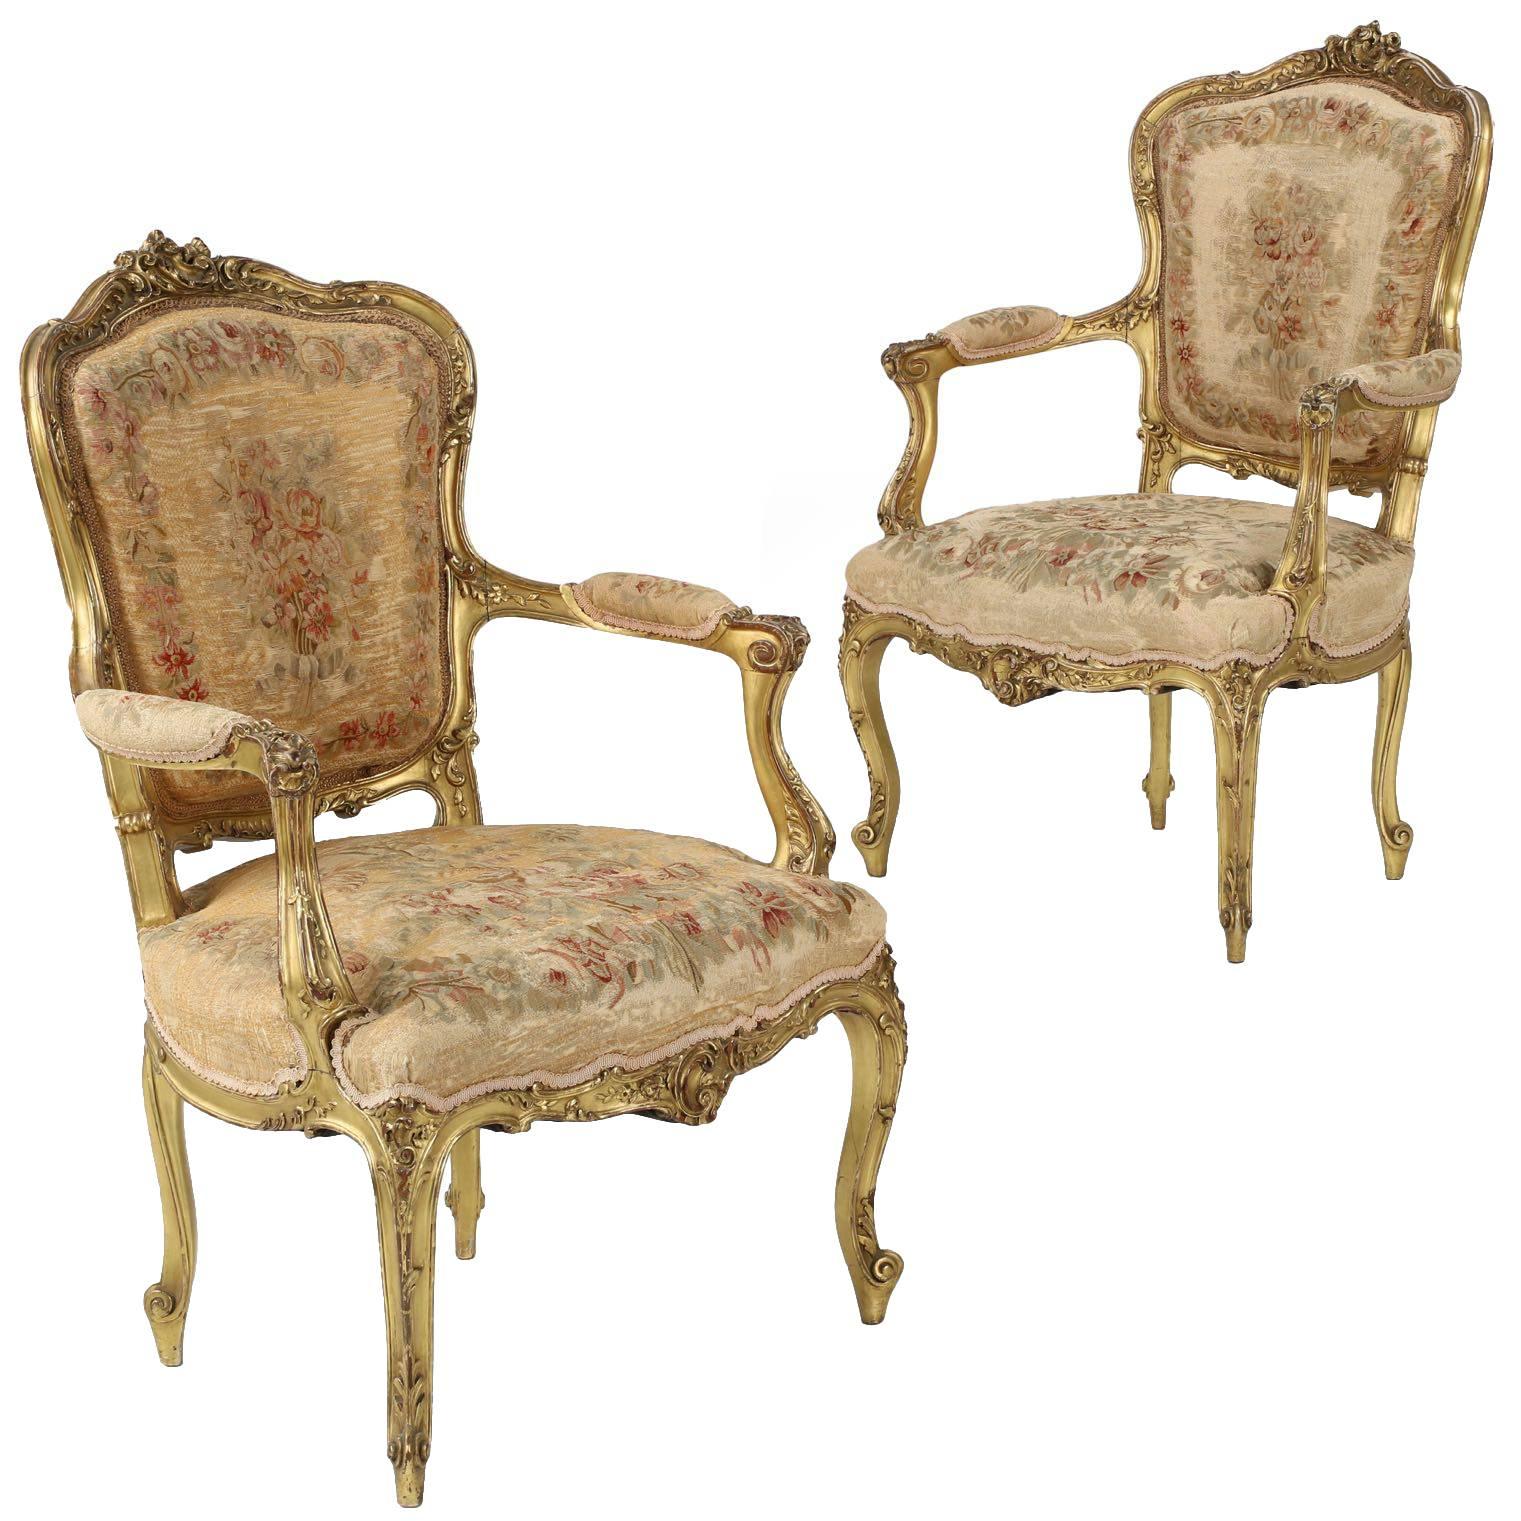 Pair of French Louis XV Style Antique Fauteuil Armchairs, circa 1870